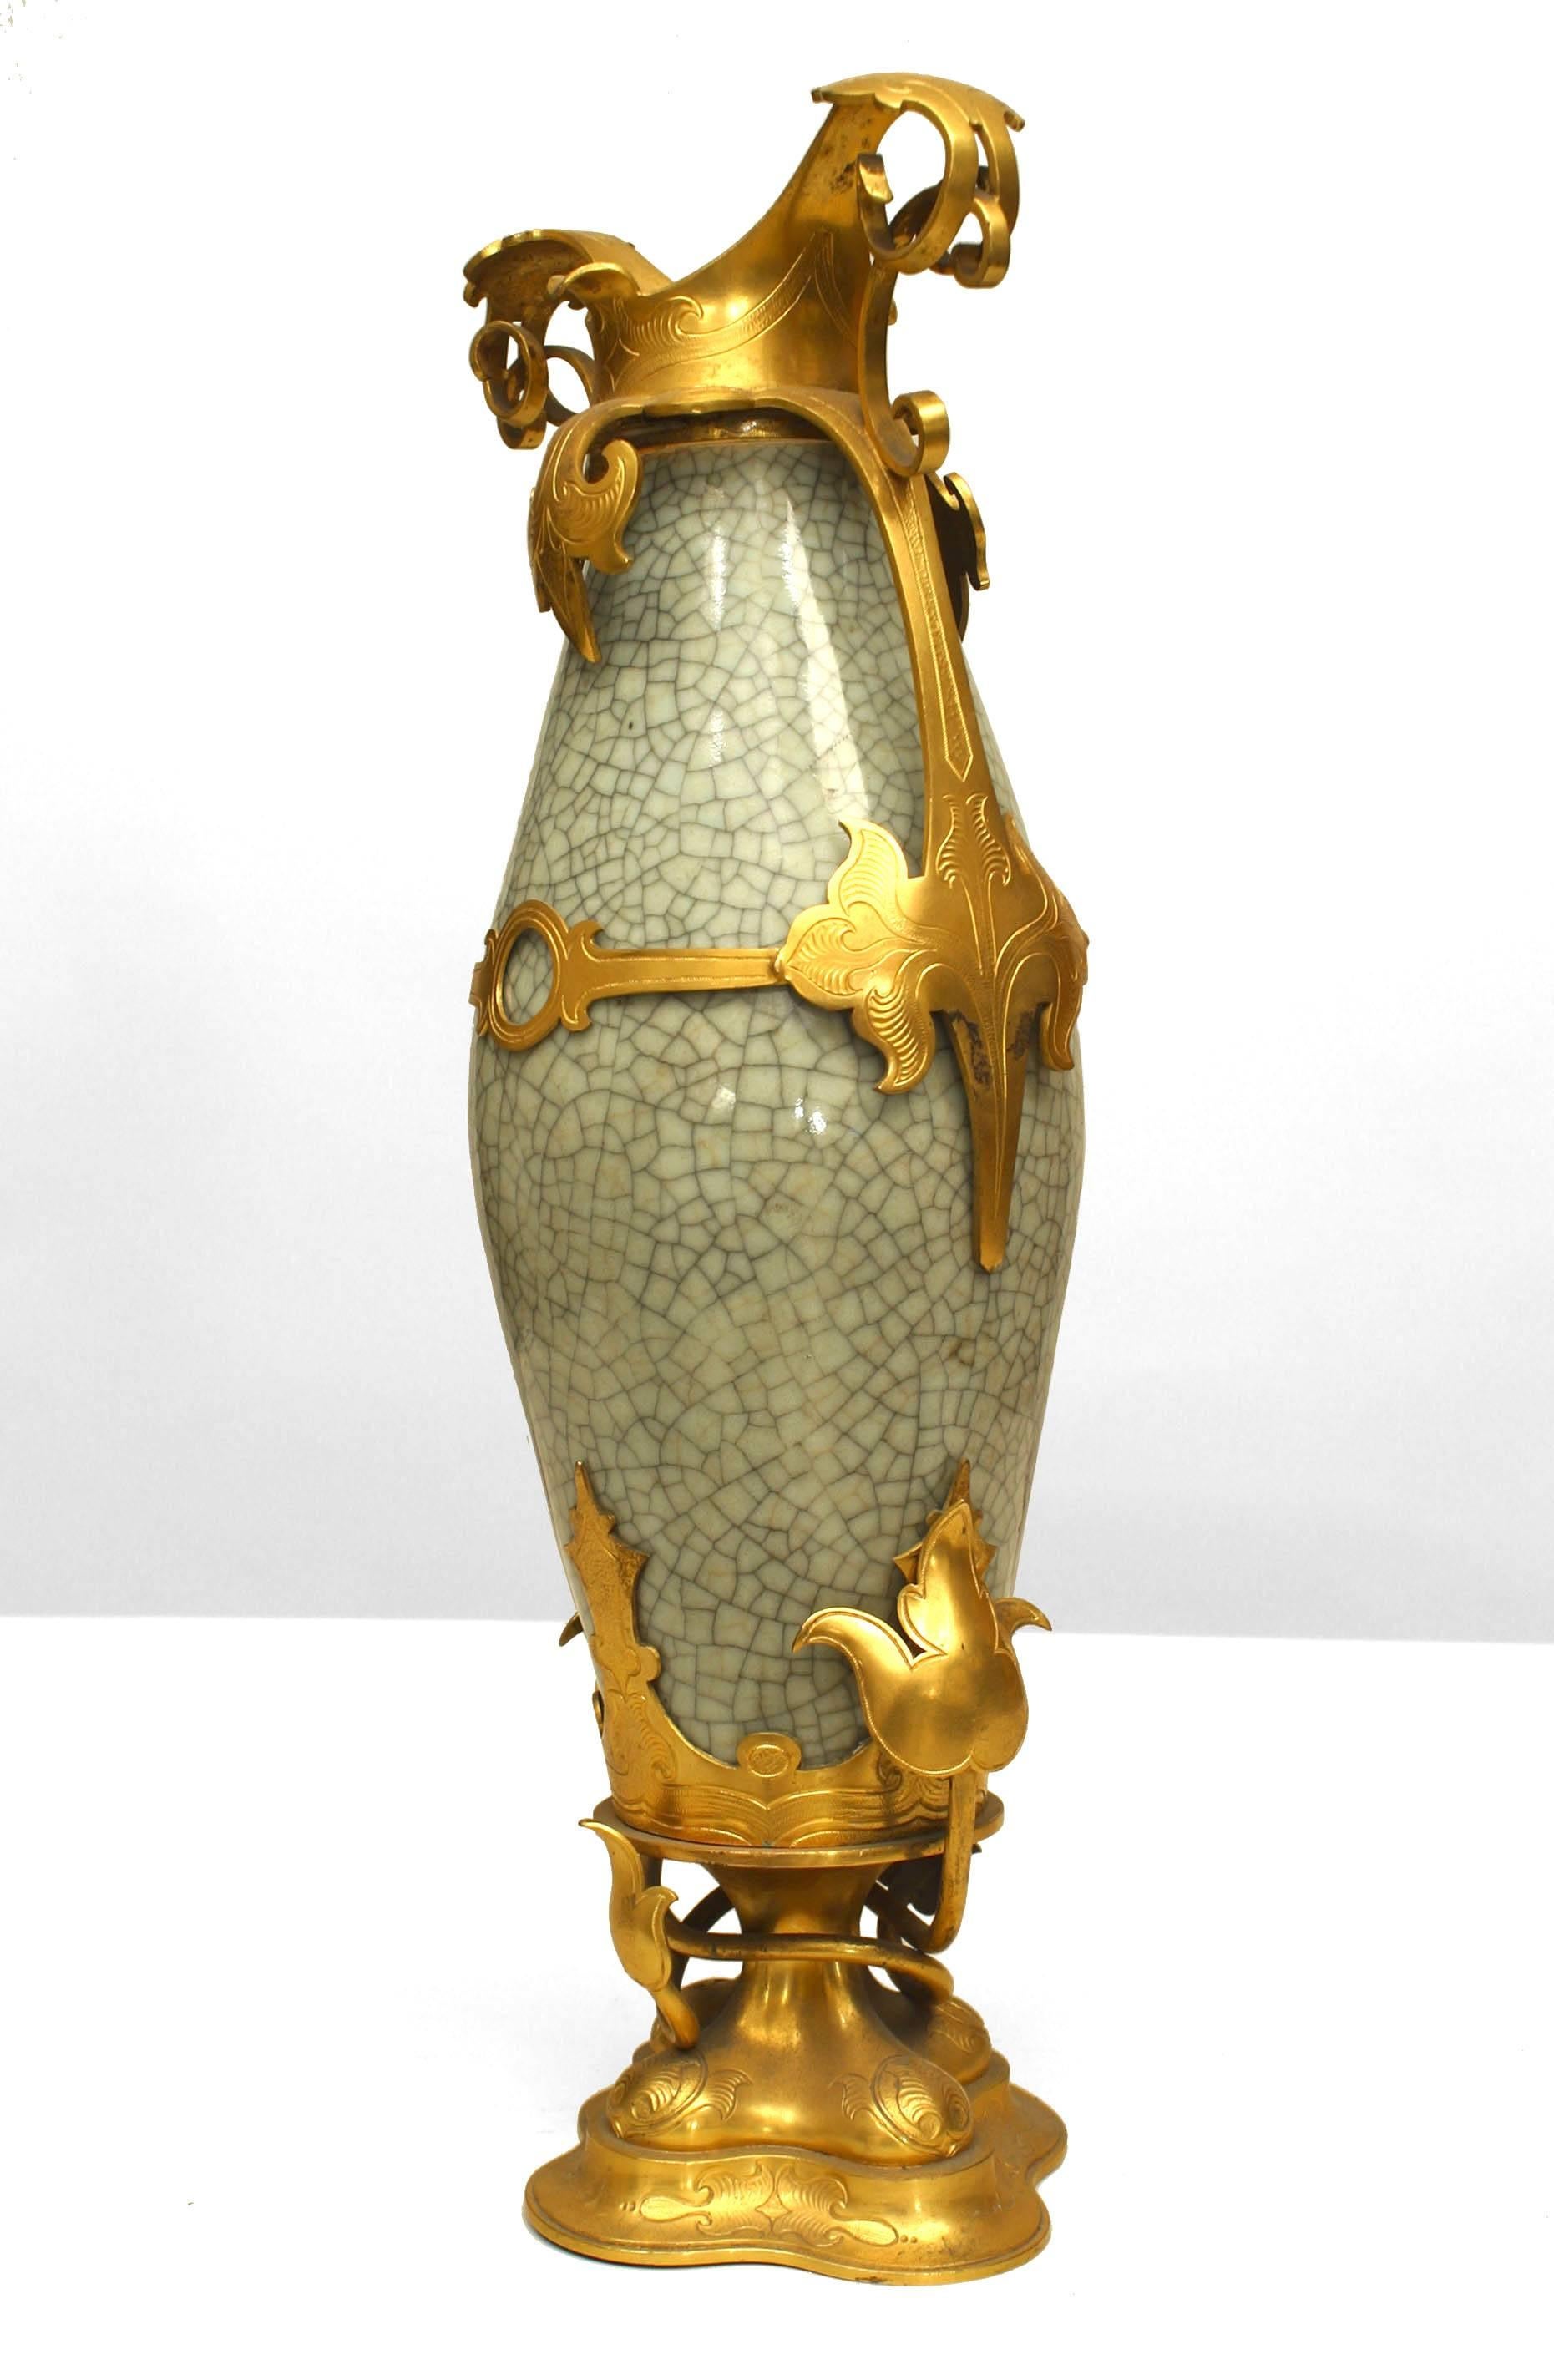 French Louis XV style celadon crackled design porcelain vase with bronze dore floral base and scroll top (19/20th Cent.)
